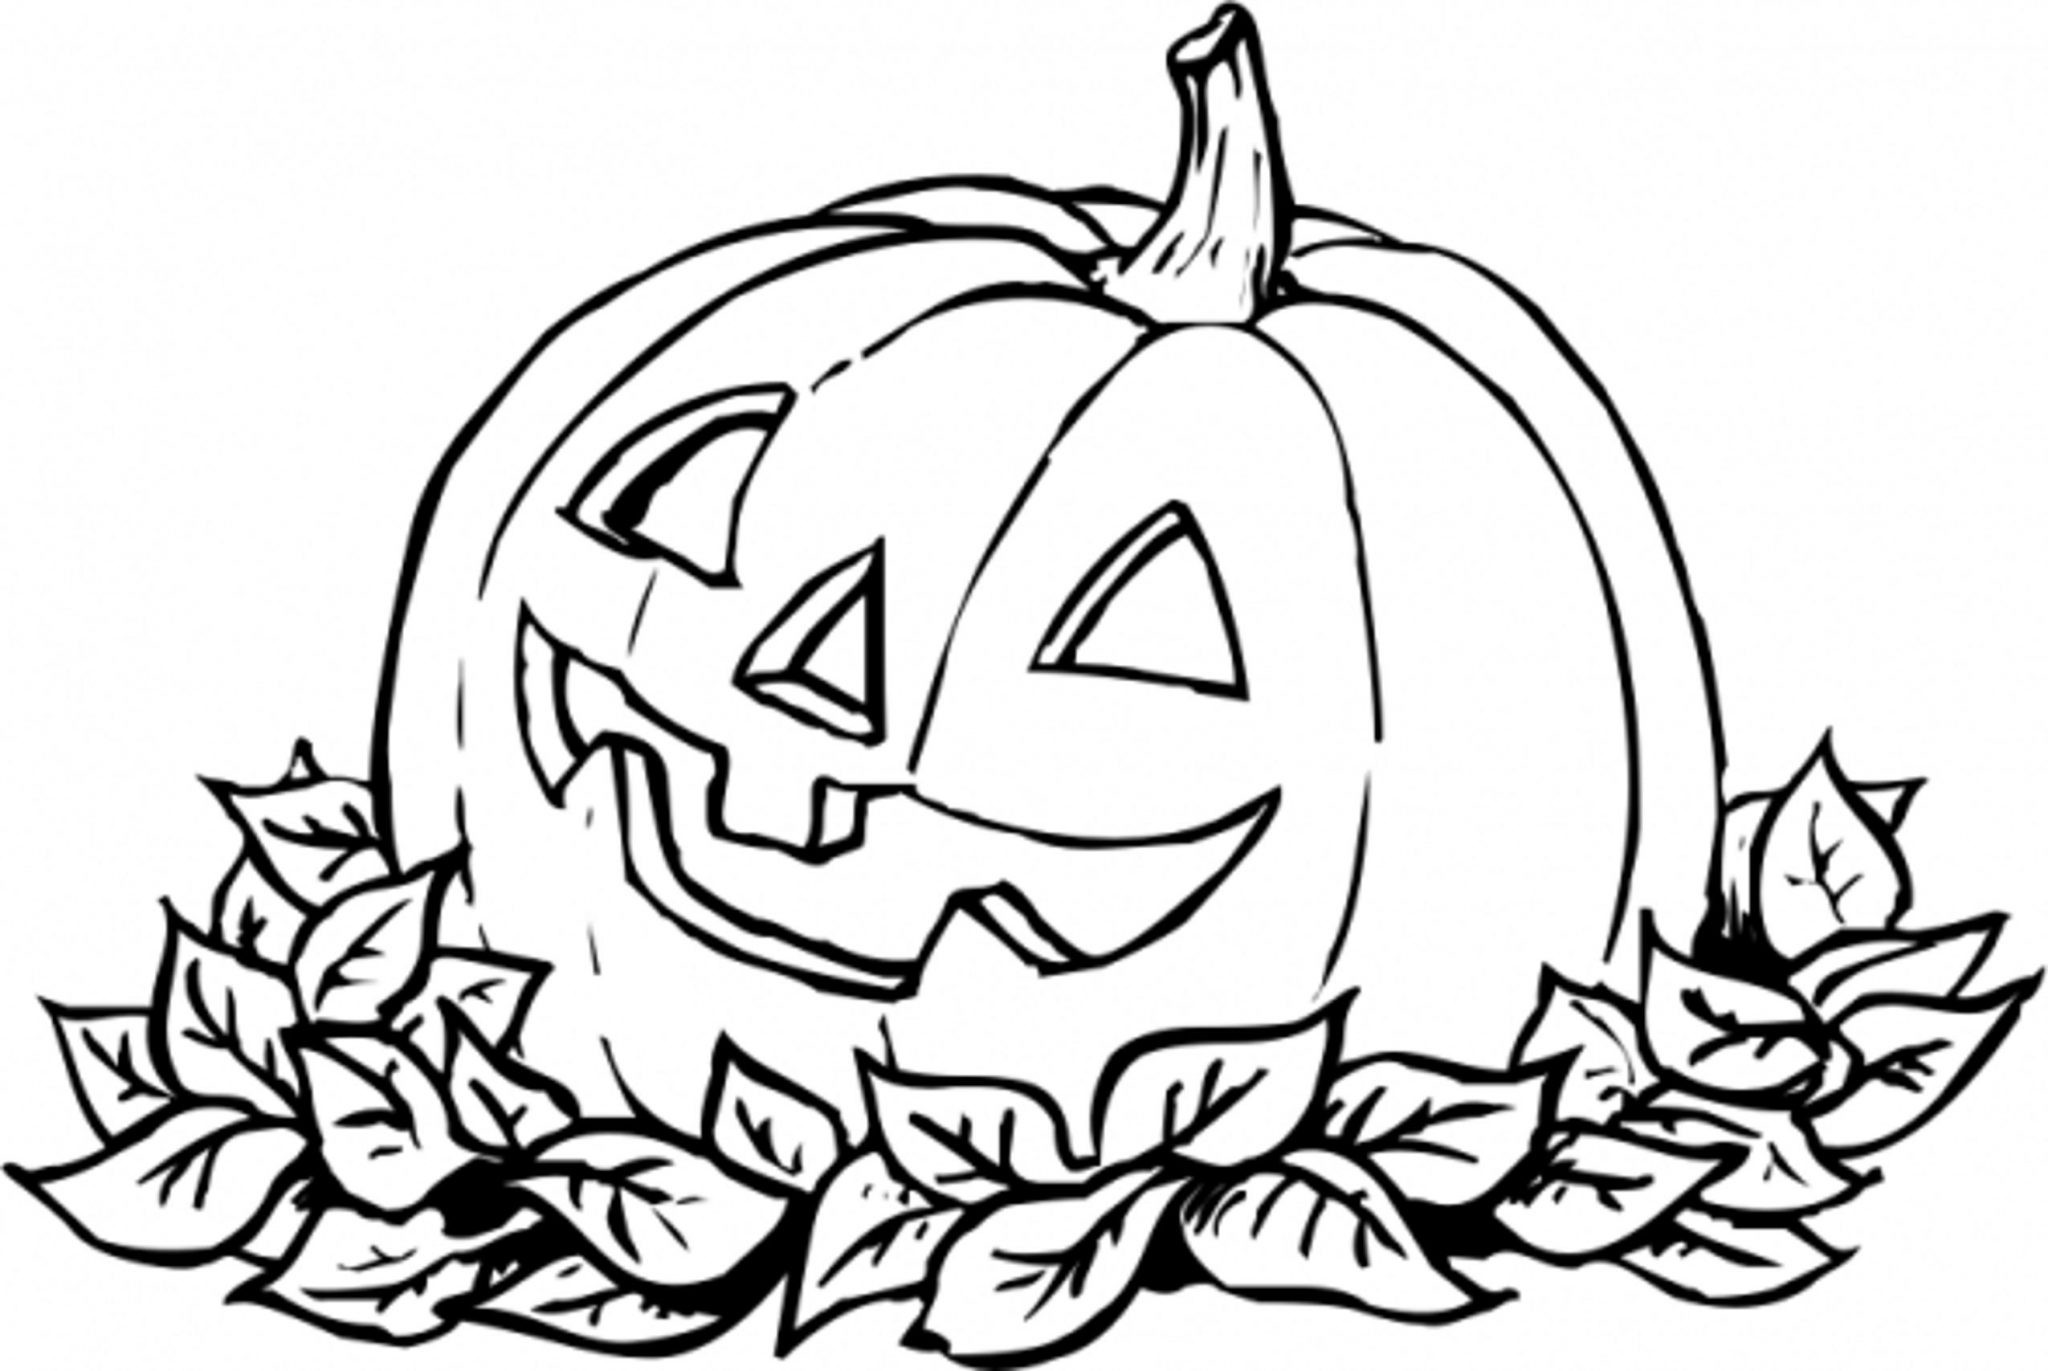 Pumpkin Coloring Pages For Kids
 Print & Download Pumpkin Coloring Pages and Benefits of